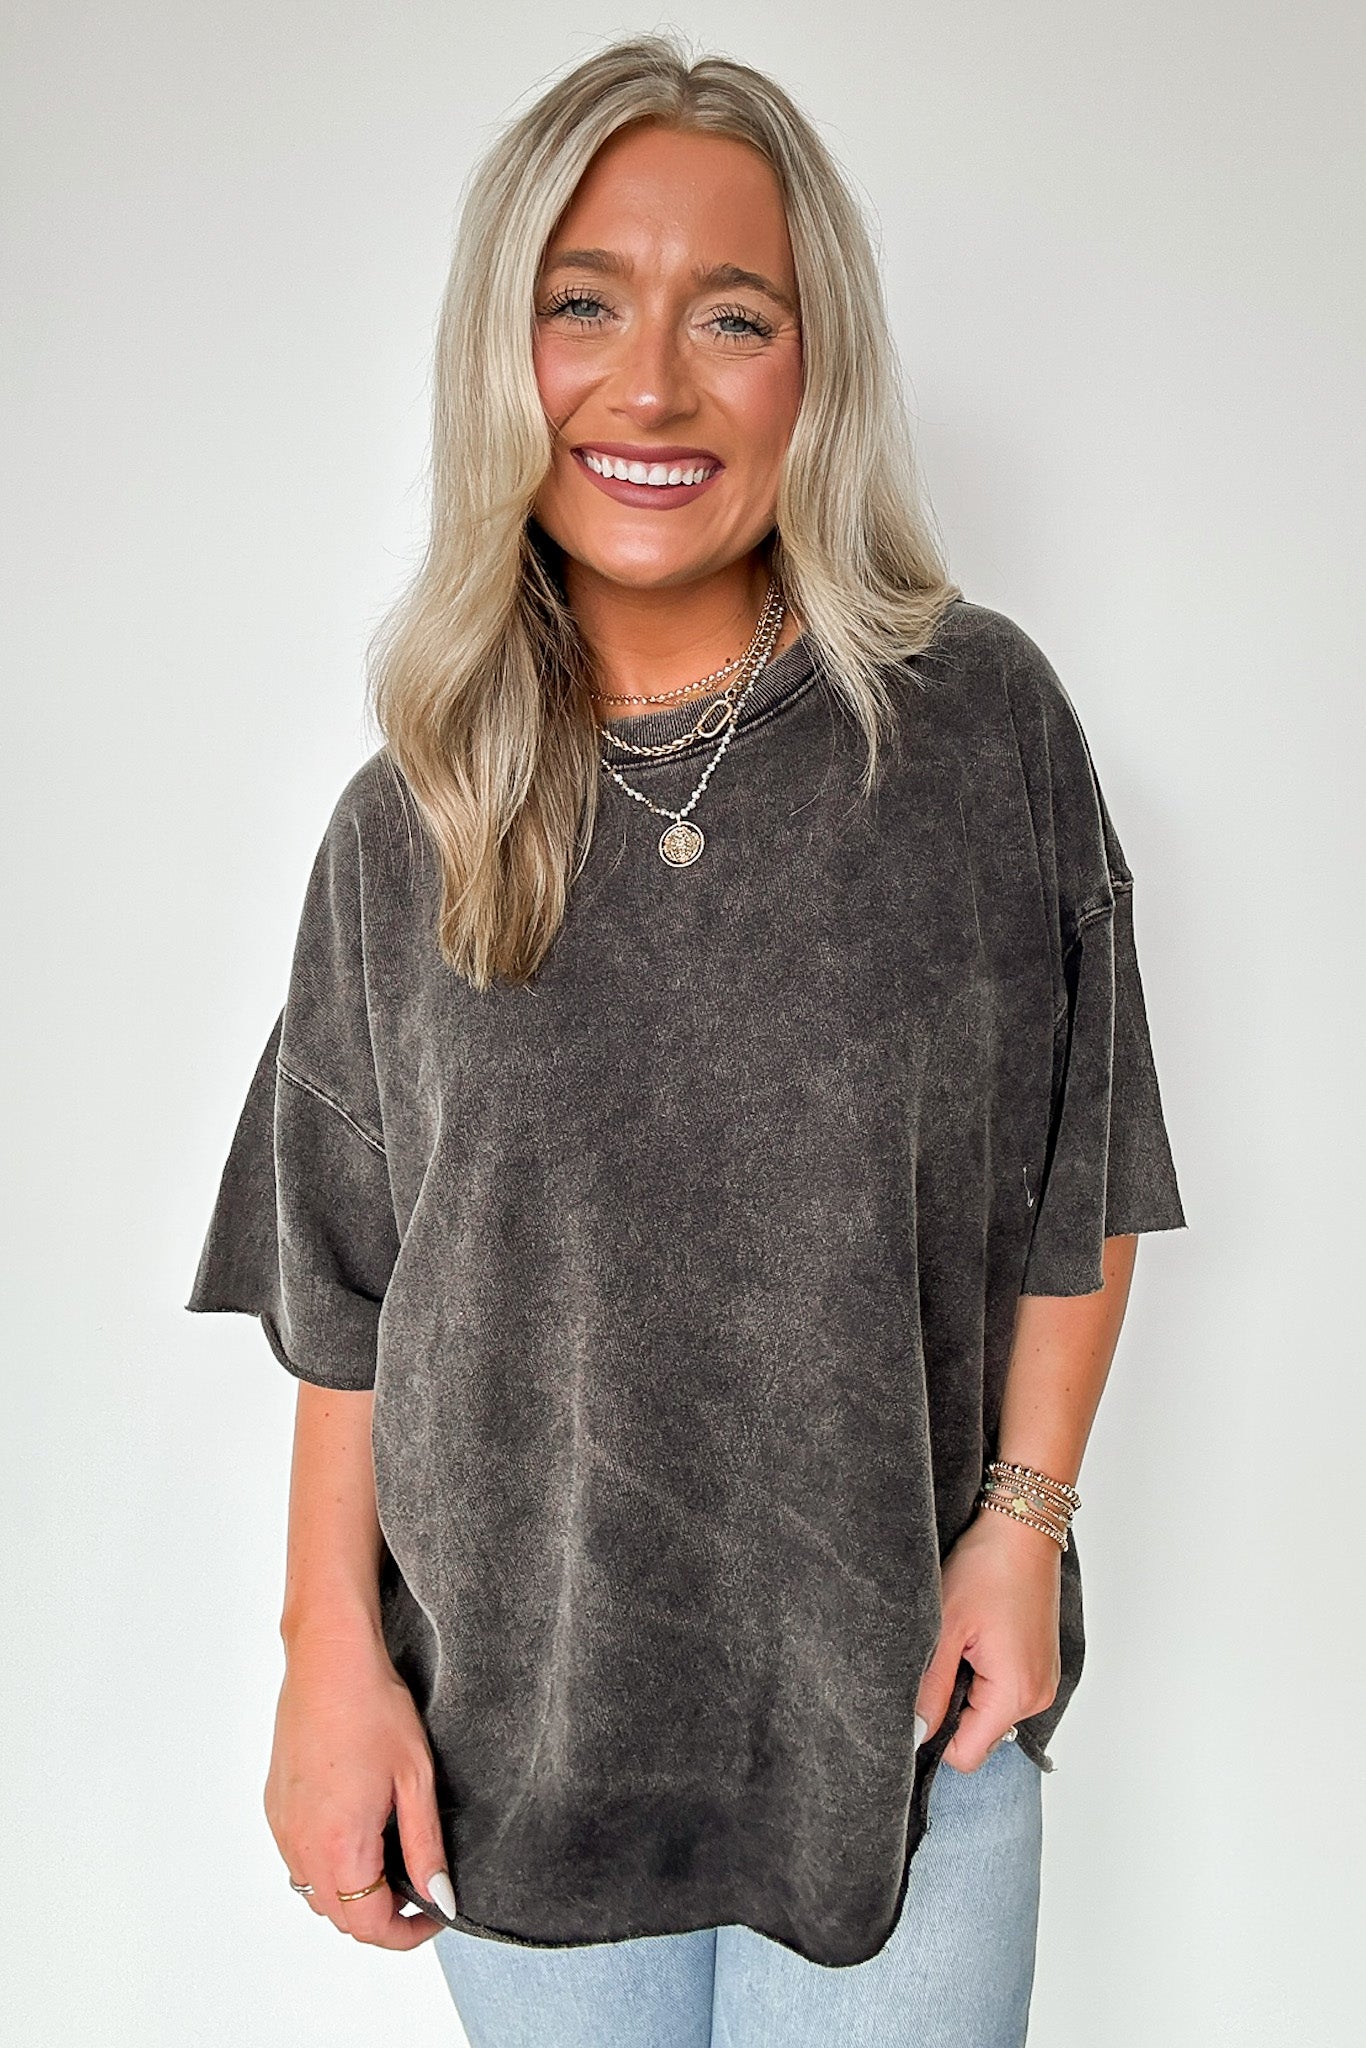 Ash Black / SM Drifting Dreams Acid Wash Relaxed Fit Top - BACK IN STOCK - Madison and Mallory